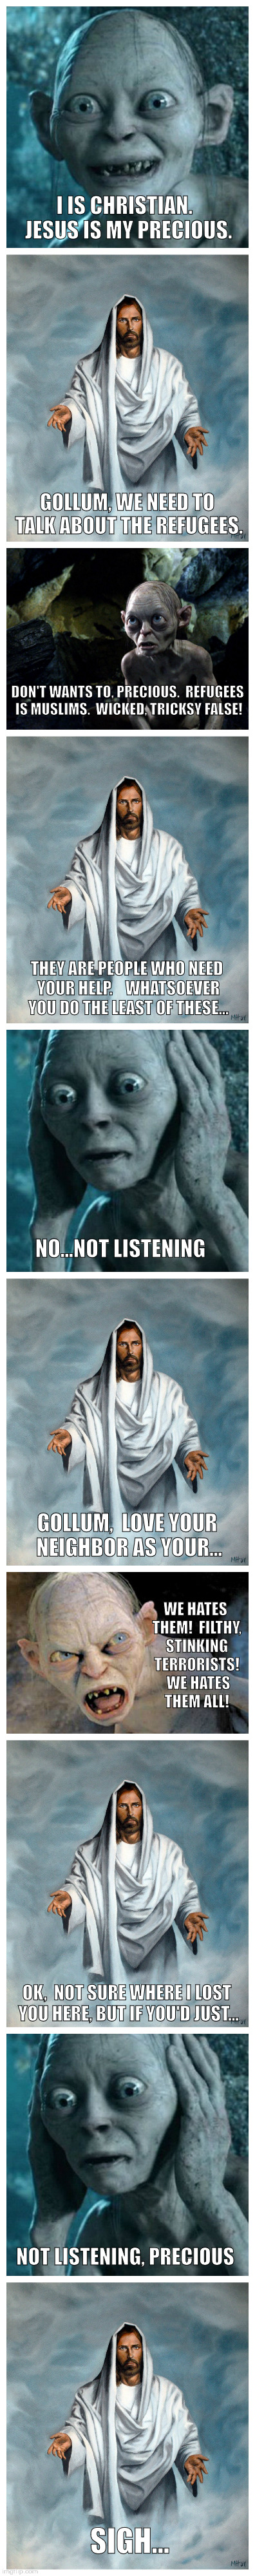 I IS CHRISTIAN.  JESUS IS MY PRECIOUS. GOLLUM, WE NEED TO TALK ABOUT THE REFUGEES. DON'T WANTS TO, PRECIOUS.  REFUGEES IS MUSLIMS.  WICKED, TRICKSY FALSE! THEY ARE PEOPLE WHO NEED YOUR HELP.    WHATSOEVER YOU DO THE LEAST OF THESE... NO...NOT LISTENING; GOLLUM,  LOVE YOUR NEIGHBOR AS YOUR... WE HATES THEM!  FILTHY, STINKING TERRORISTS!  WE HATES THEM ALL! OK,  NOT SURE WHERE I LOST YOU HERE, BUT IF YOU'D JUST... NOT LISTENING, PRECIOUS; SIGH... | image tagged in gollum vs jesus | made w/ Imgflip meme maker